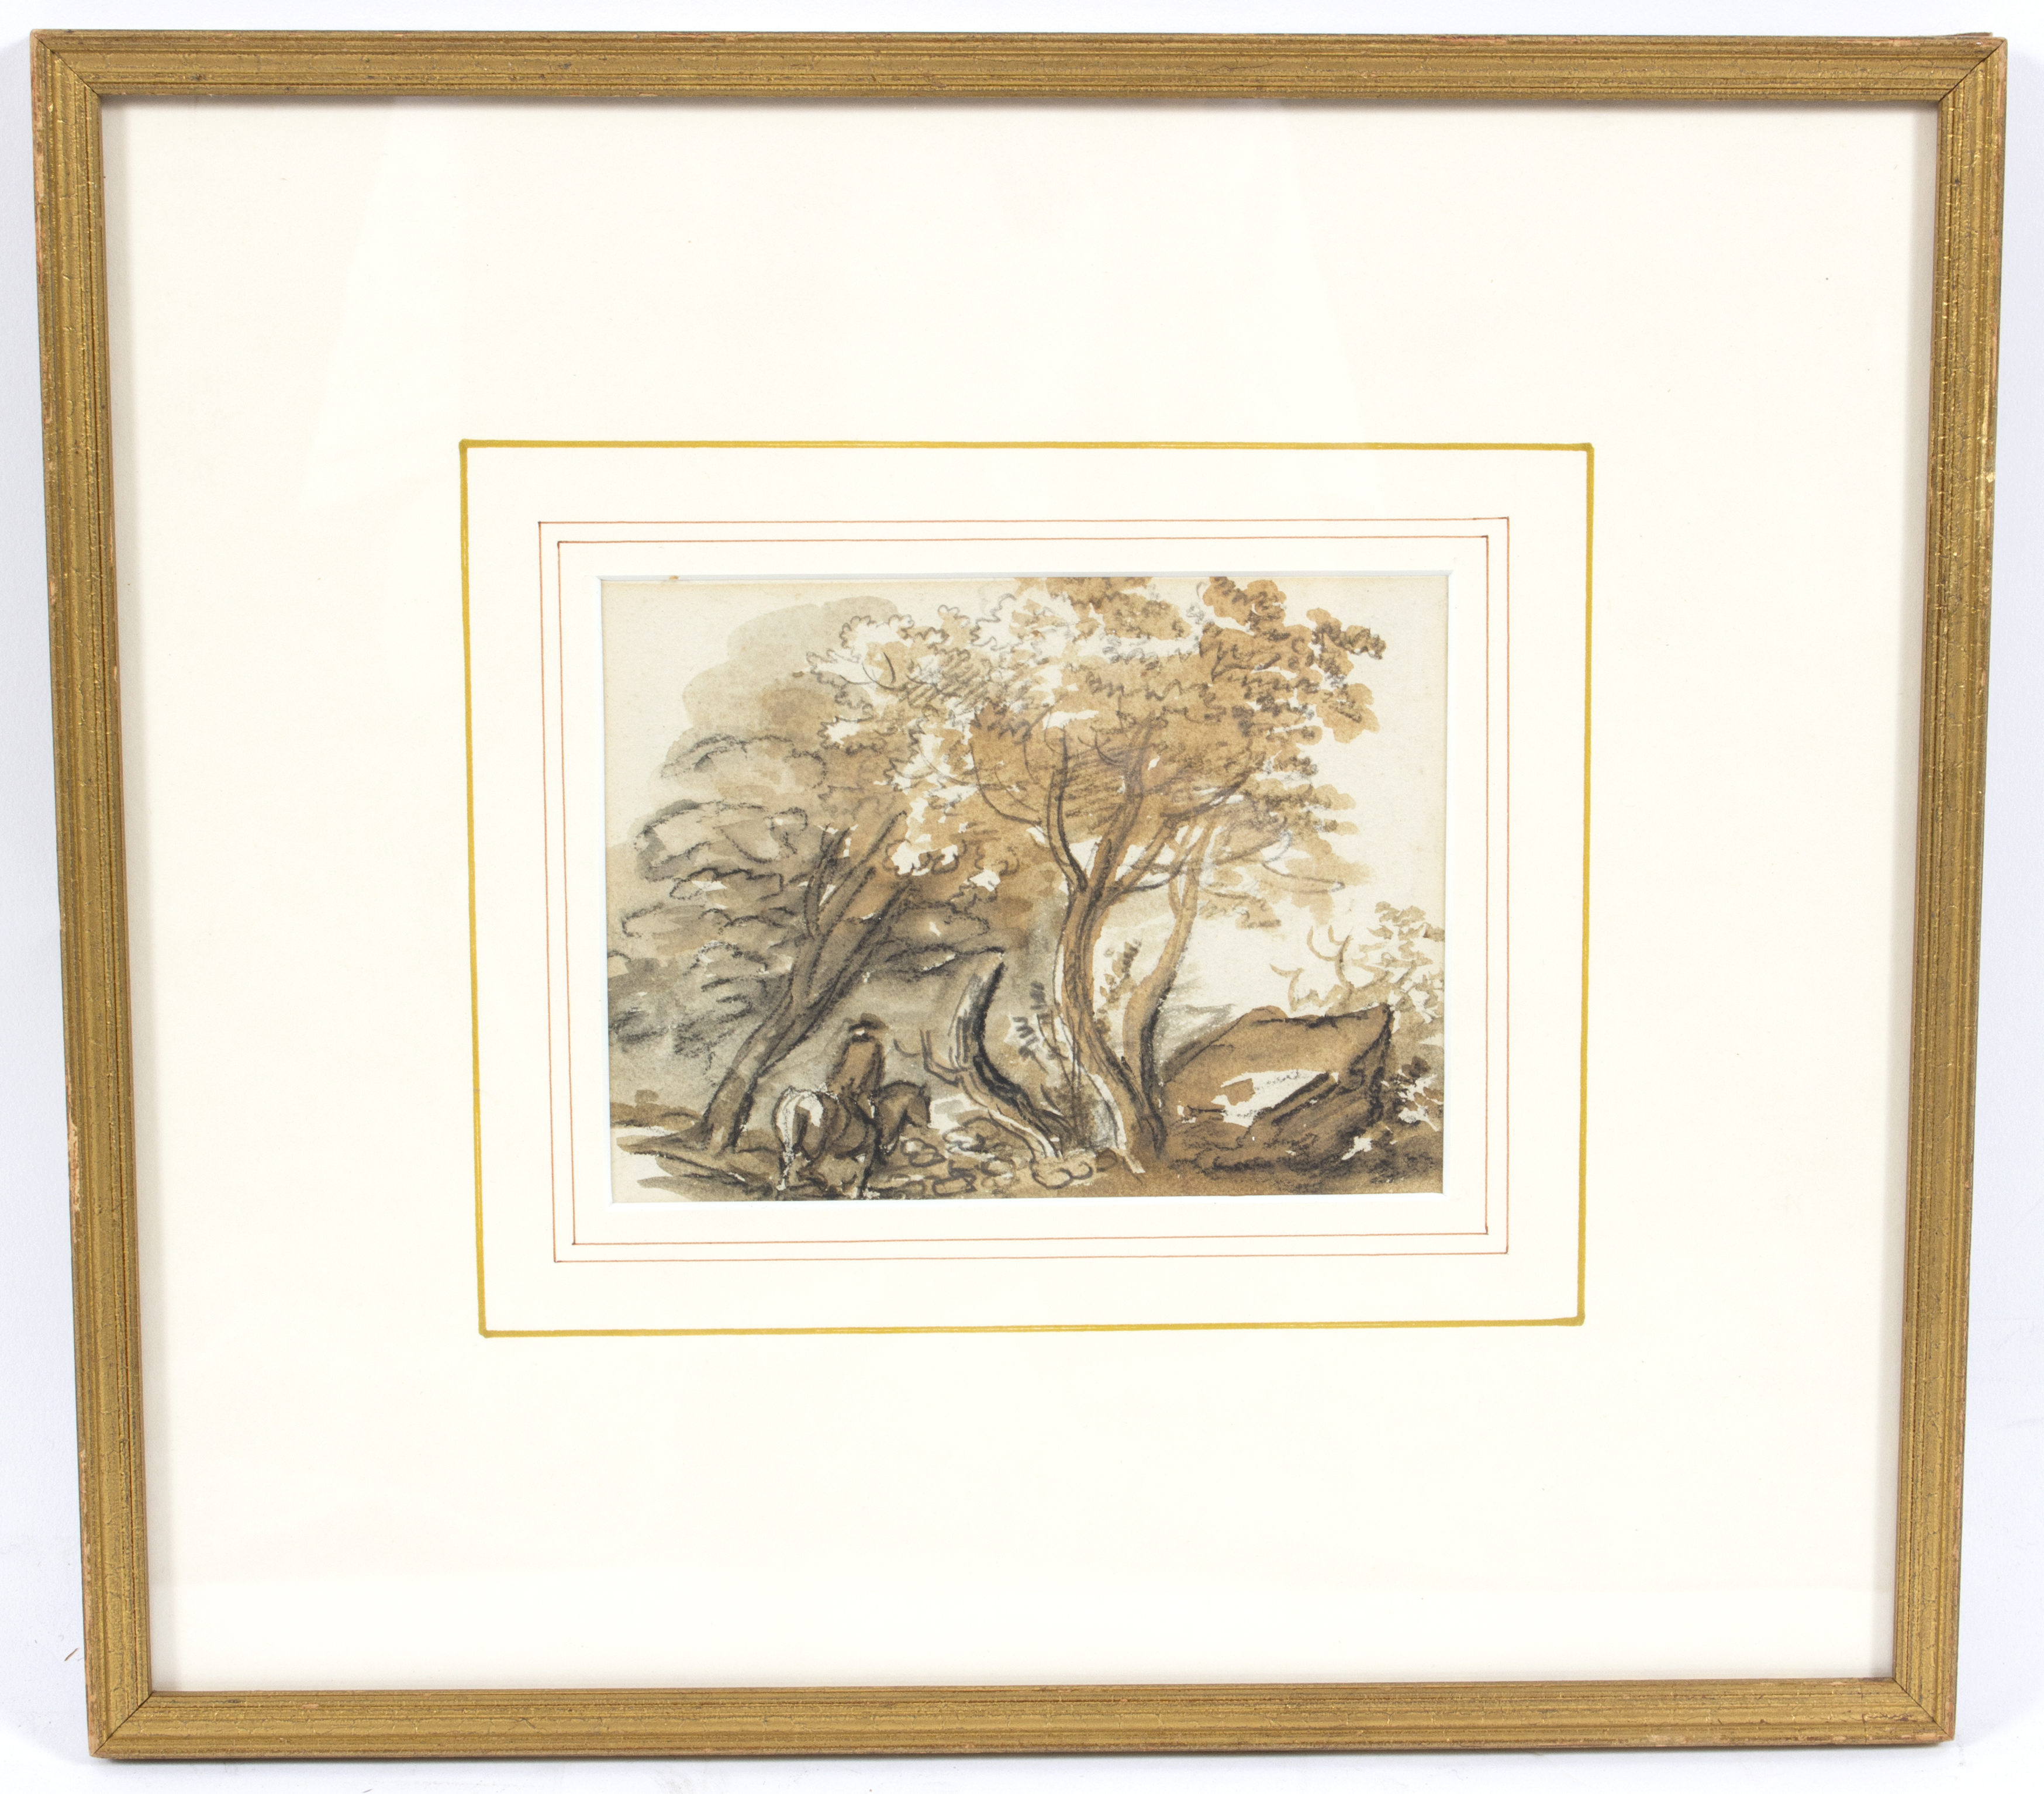 Attributed to Paul Sandby (1725-1809)/Horse and Rider in Woodland/pencil and wash, 12cm x 16cm - Image 2 of 3